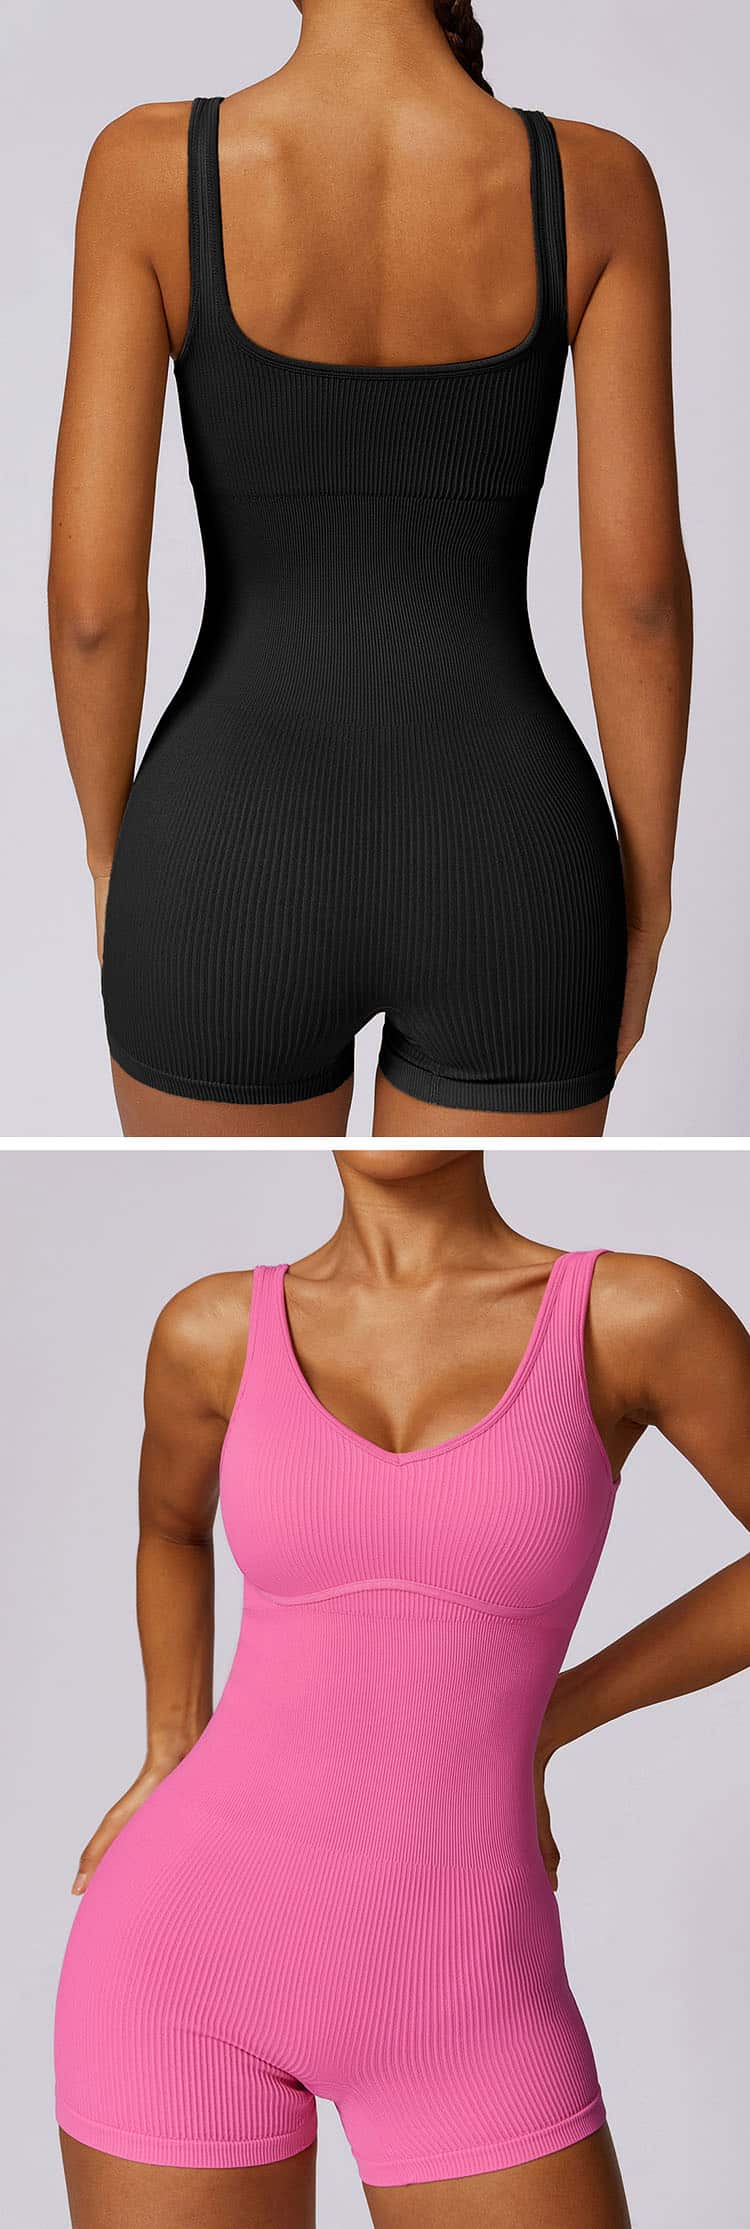 Cute workout shirts with sayings for womens is close to the trend of sportswear